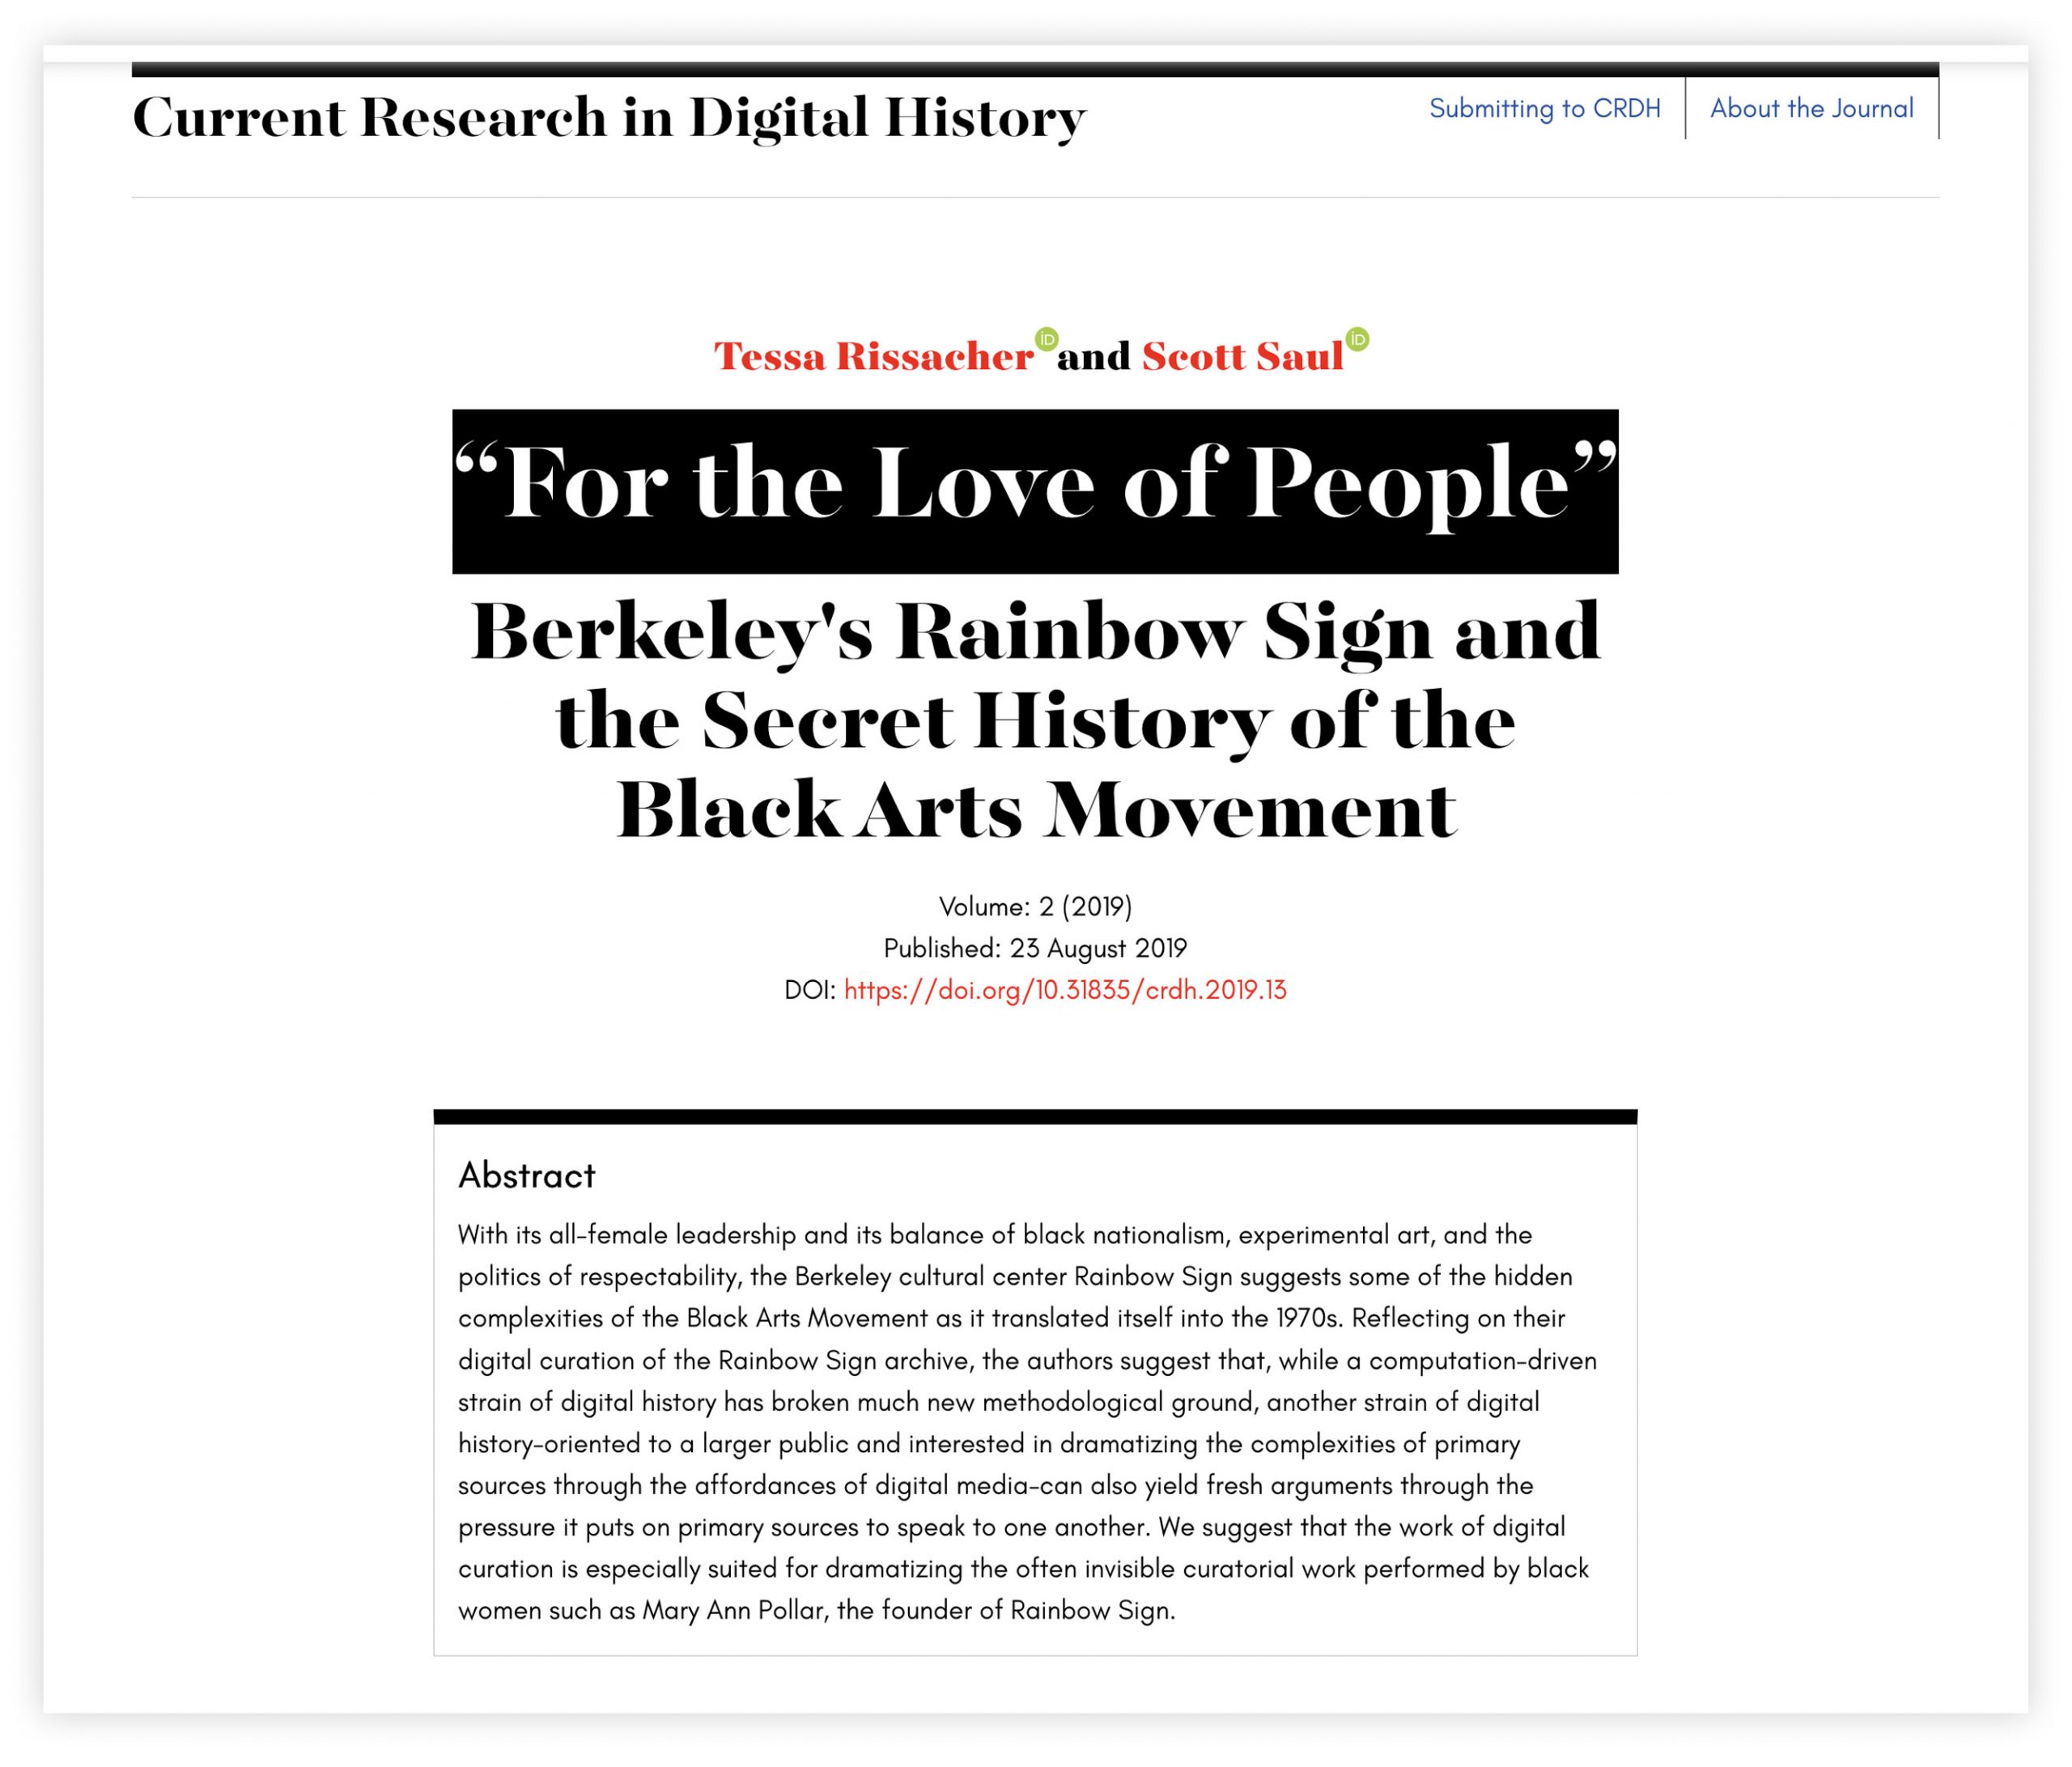 Screengrab of the Current Research in Digital History Journal website home page.